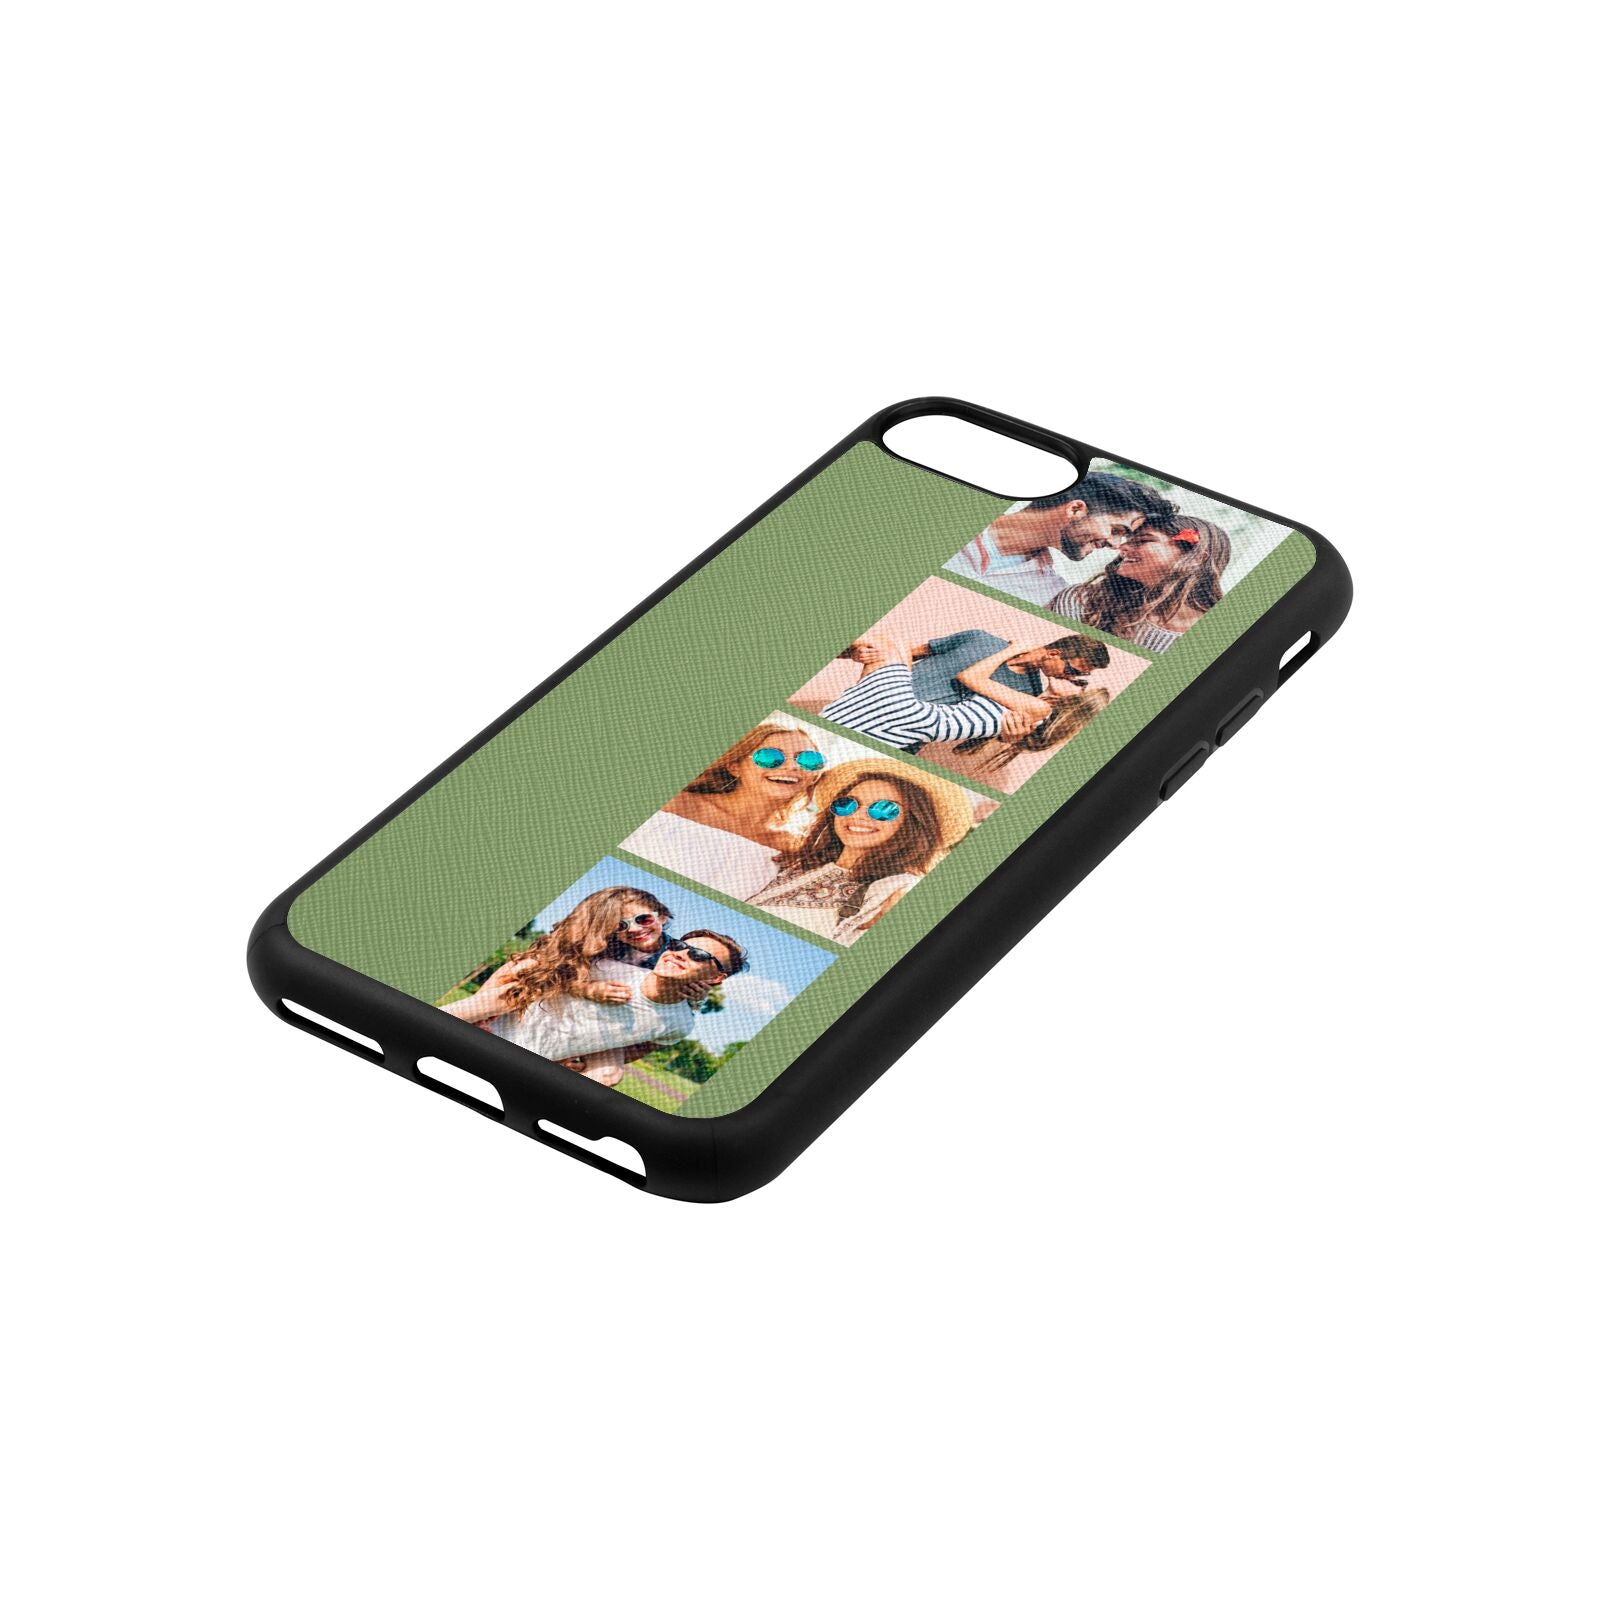 Photo Strip Montage Upload Lime Saffiano Leather iPhone 8 Case Side Angle